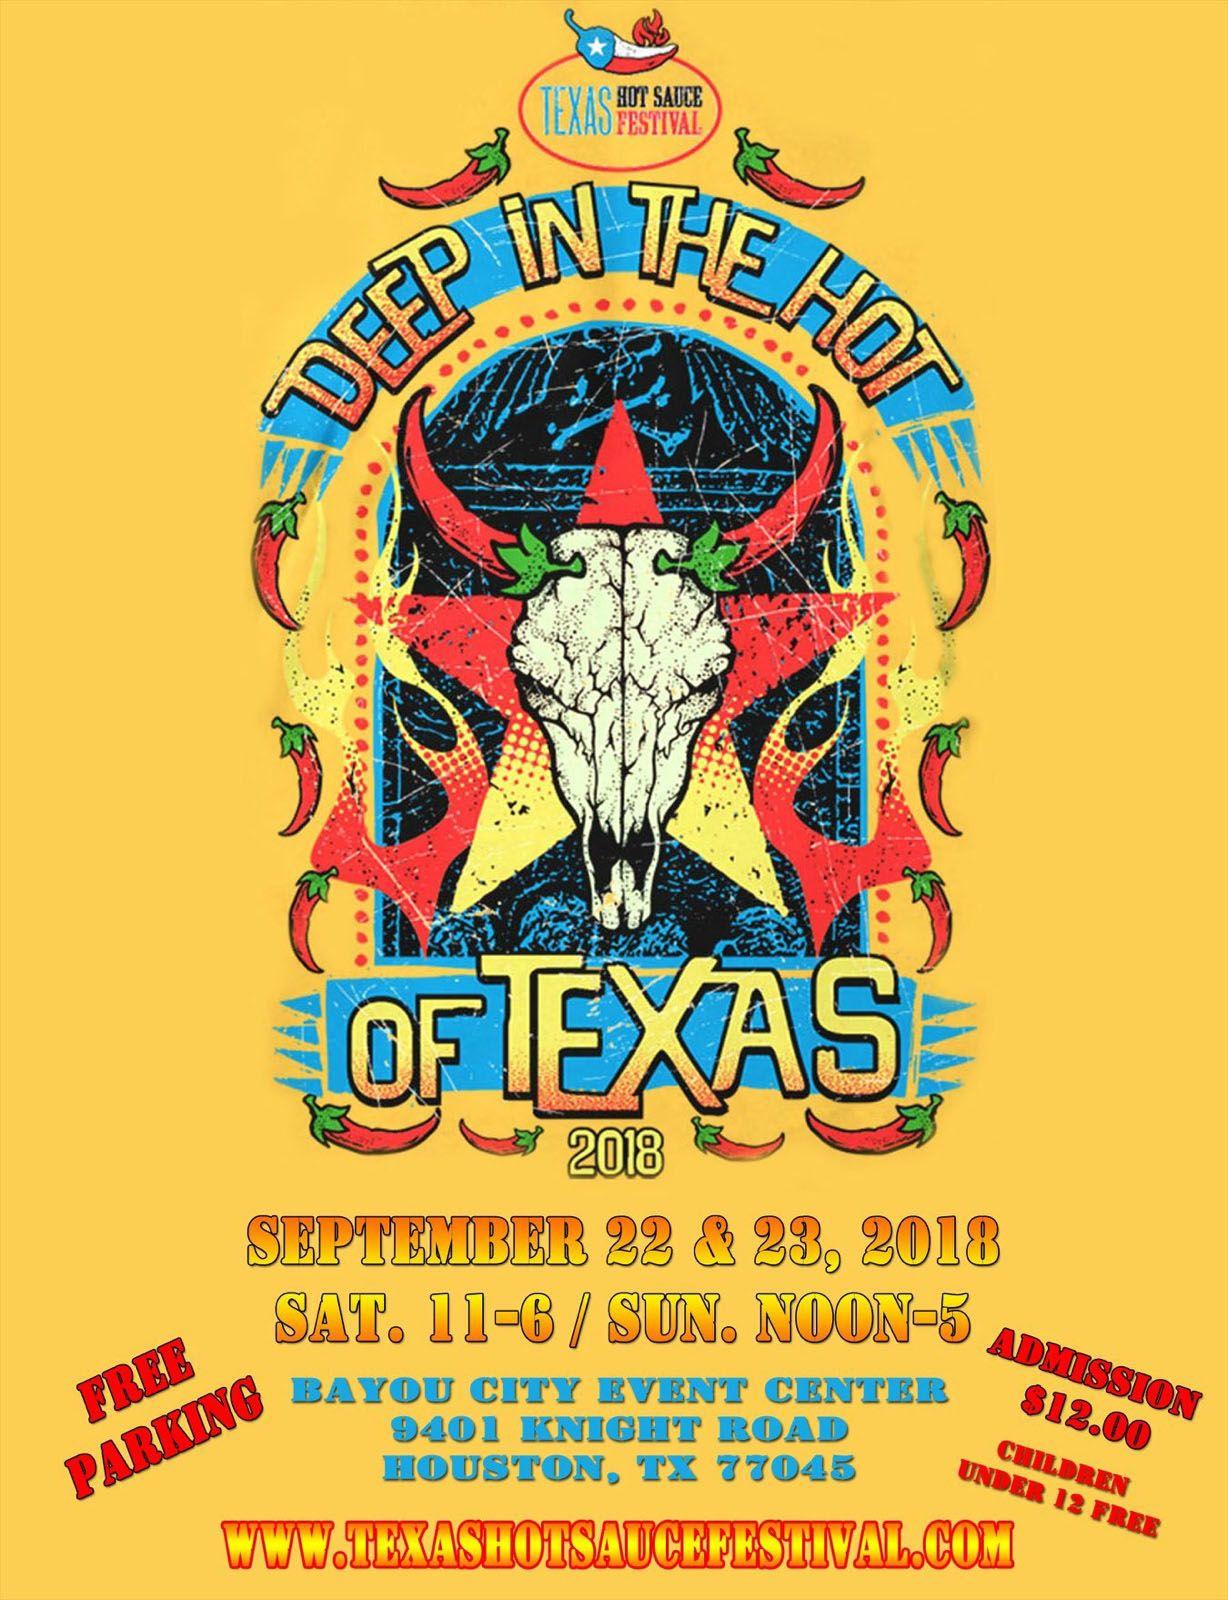 Hot Sauce Food Logo - The 18th Annual Texas Hot Sauce Festival is Coming!